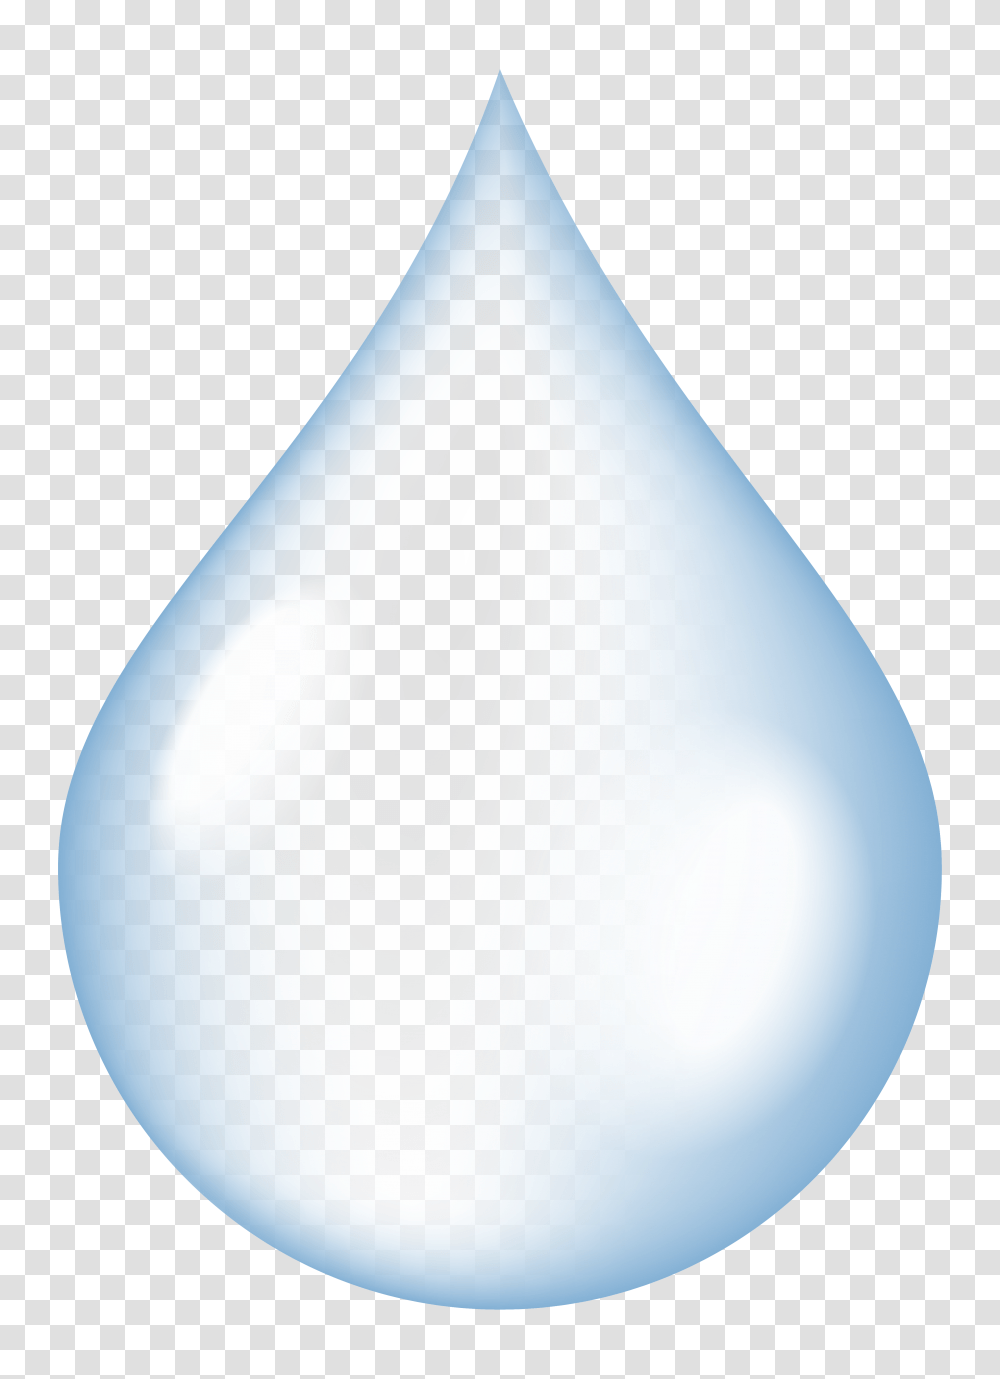 Water Drip & Clipart Free Download Ywd Clip Art Drop Of Water, Droplet, Balloon, Lamp Transparent Png